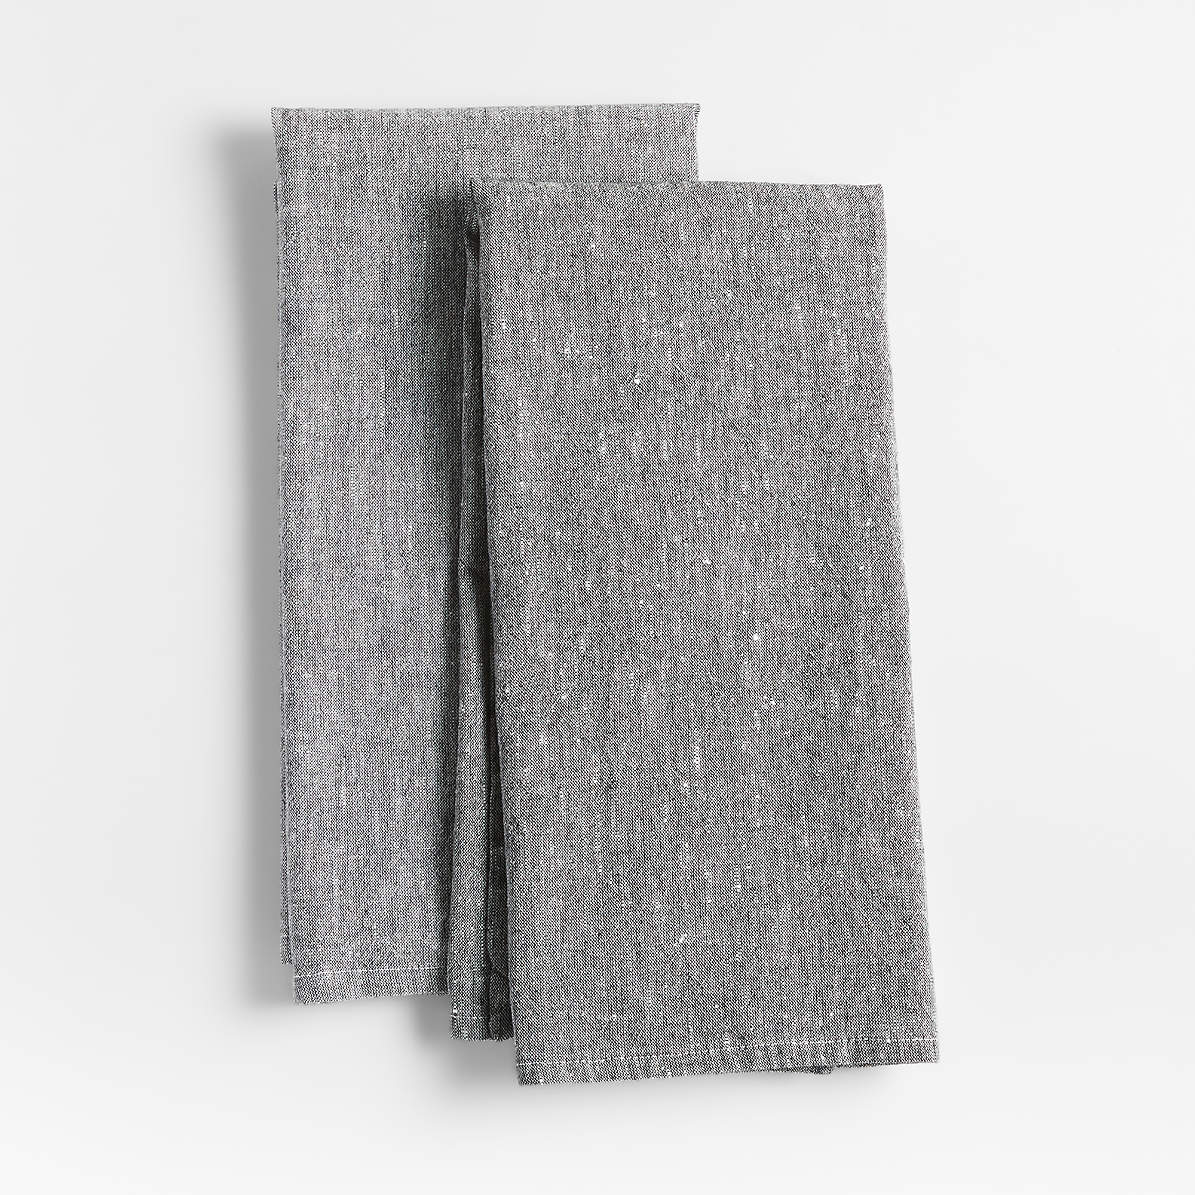 Oversized Waffle Alloy Grey Tea Kitchen Dish Towels, Set of 2 + Reviews